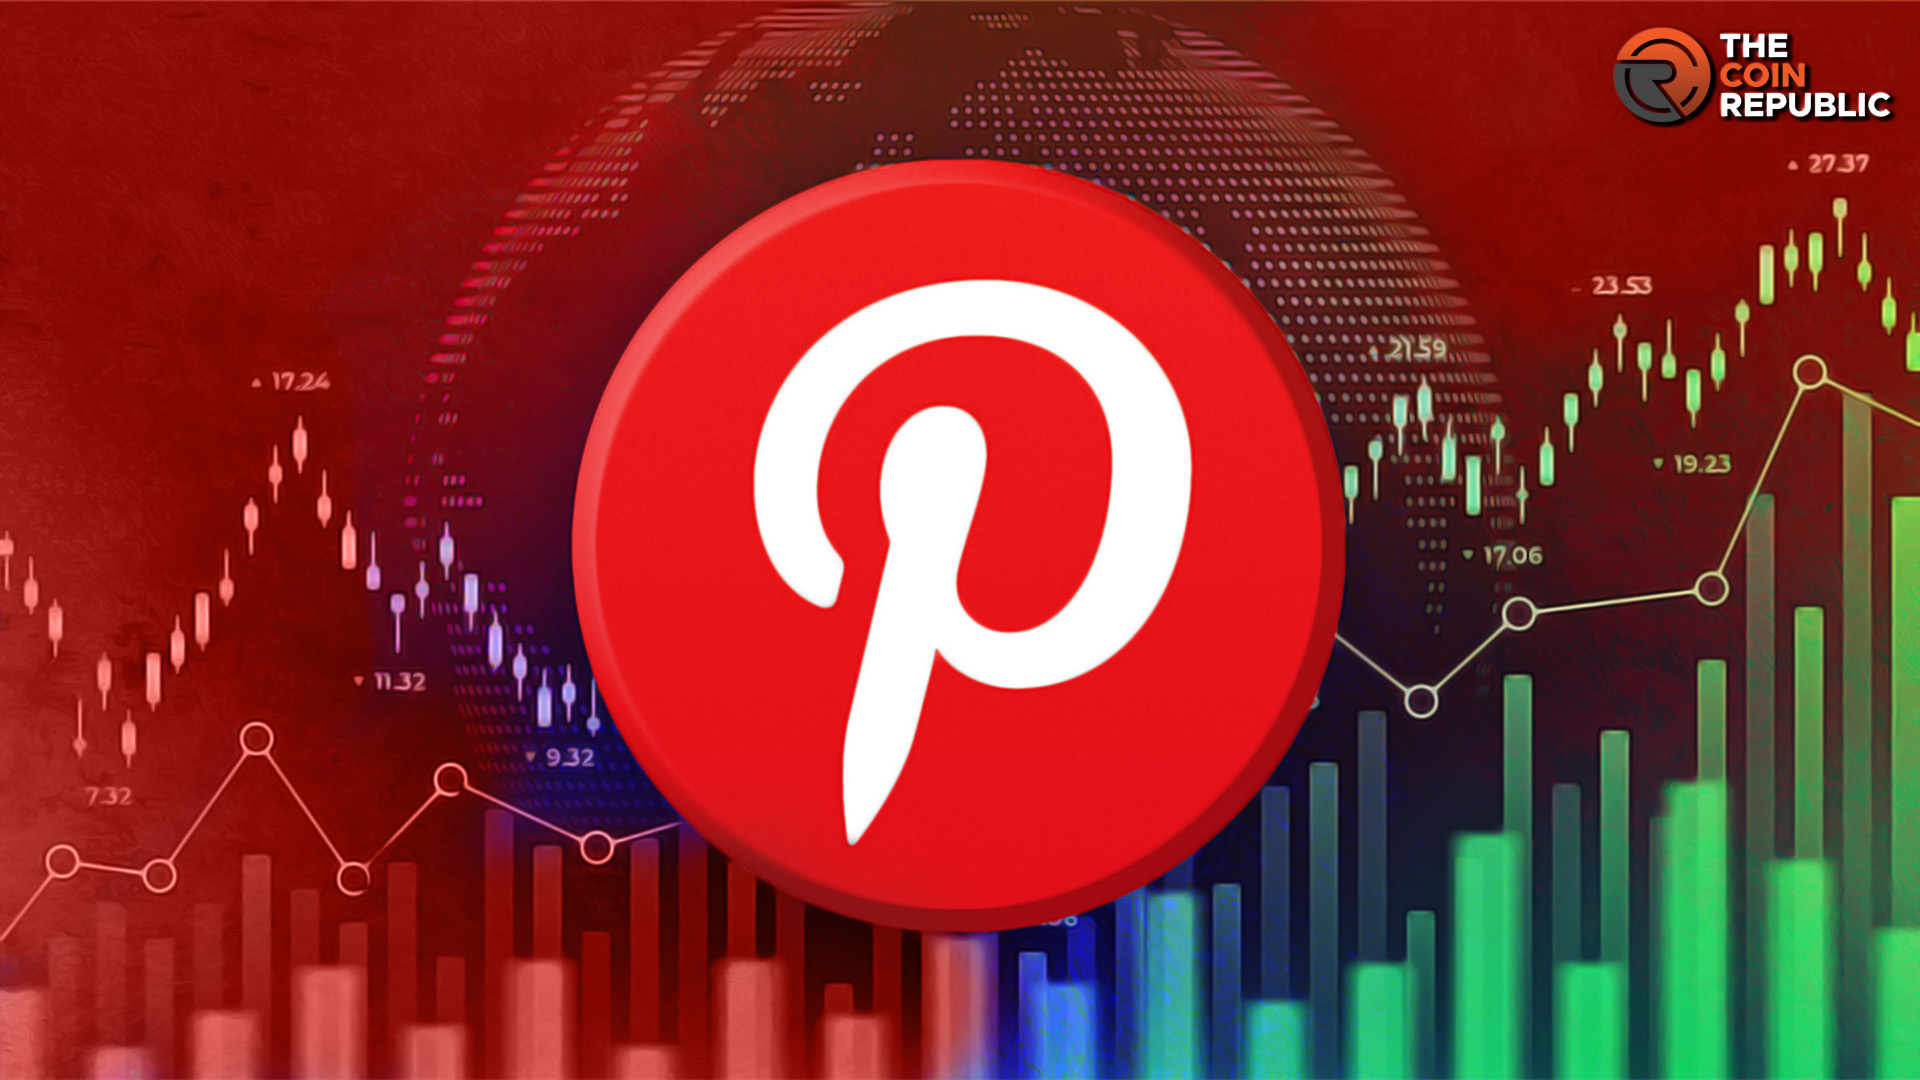 Pinterest Inc. (PINS Stock): Earnings Announcement & Expectations